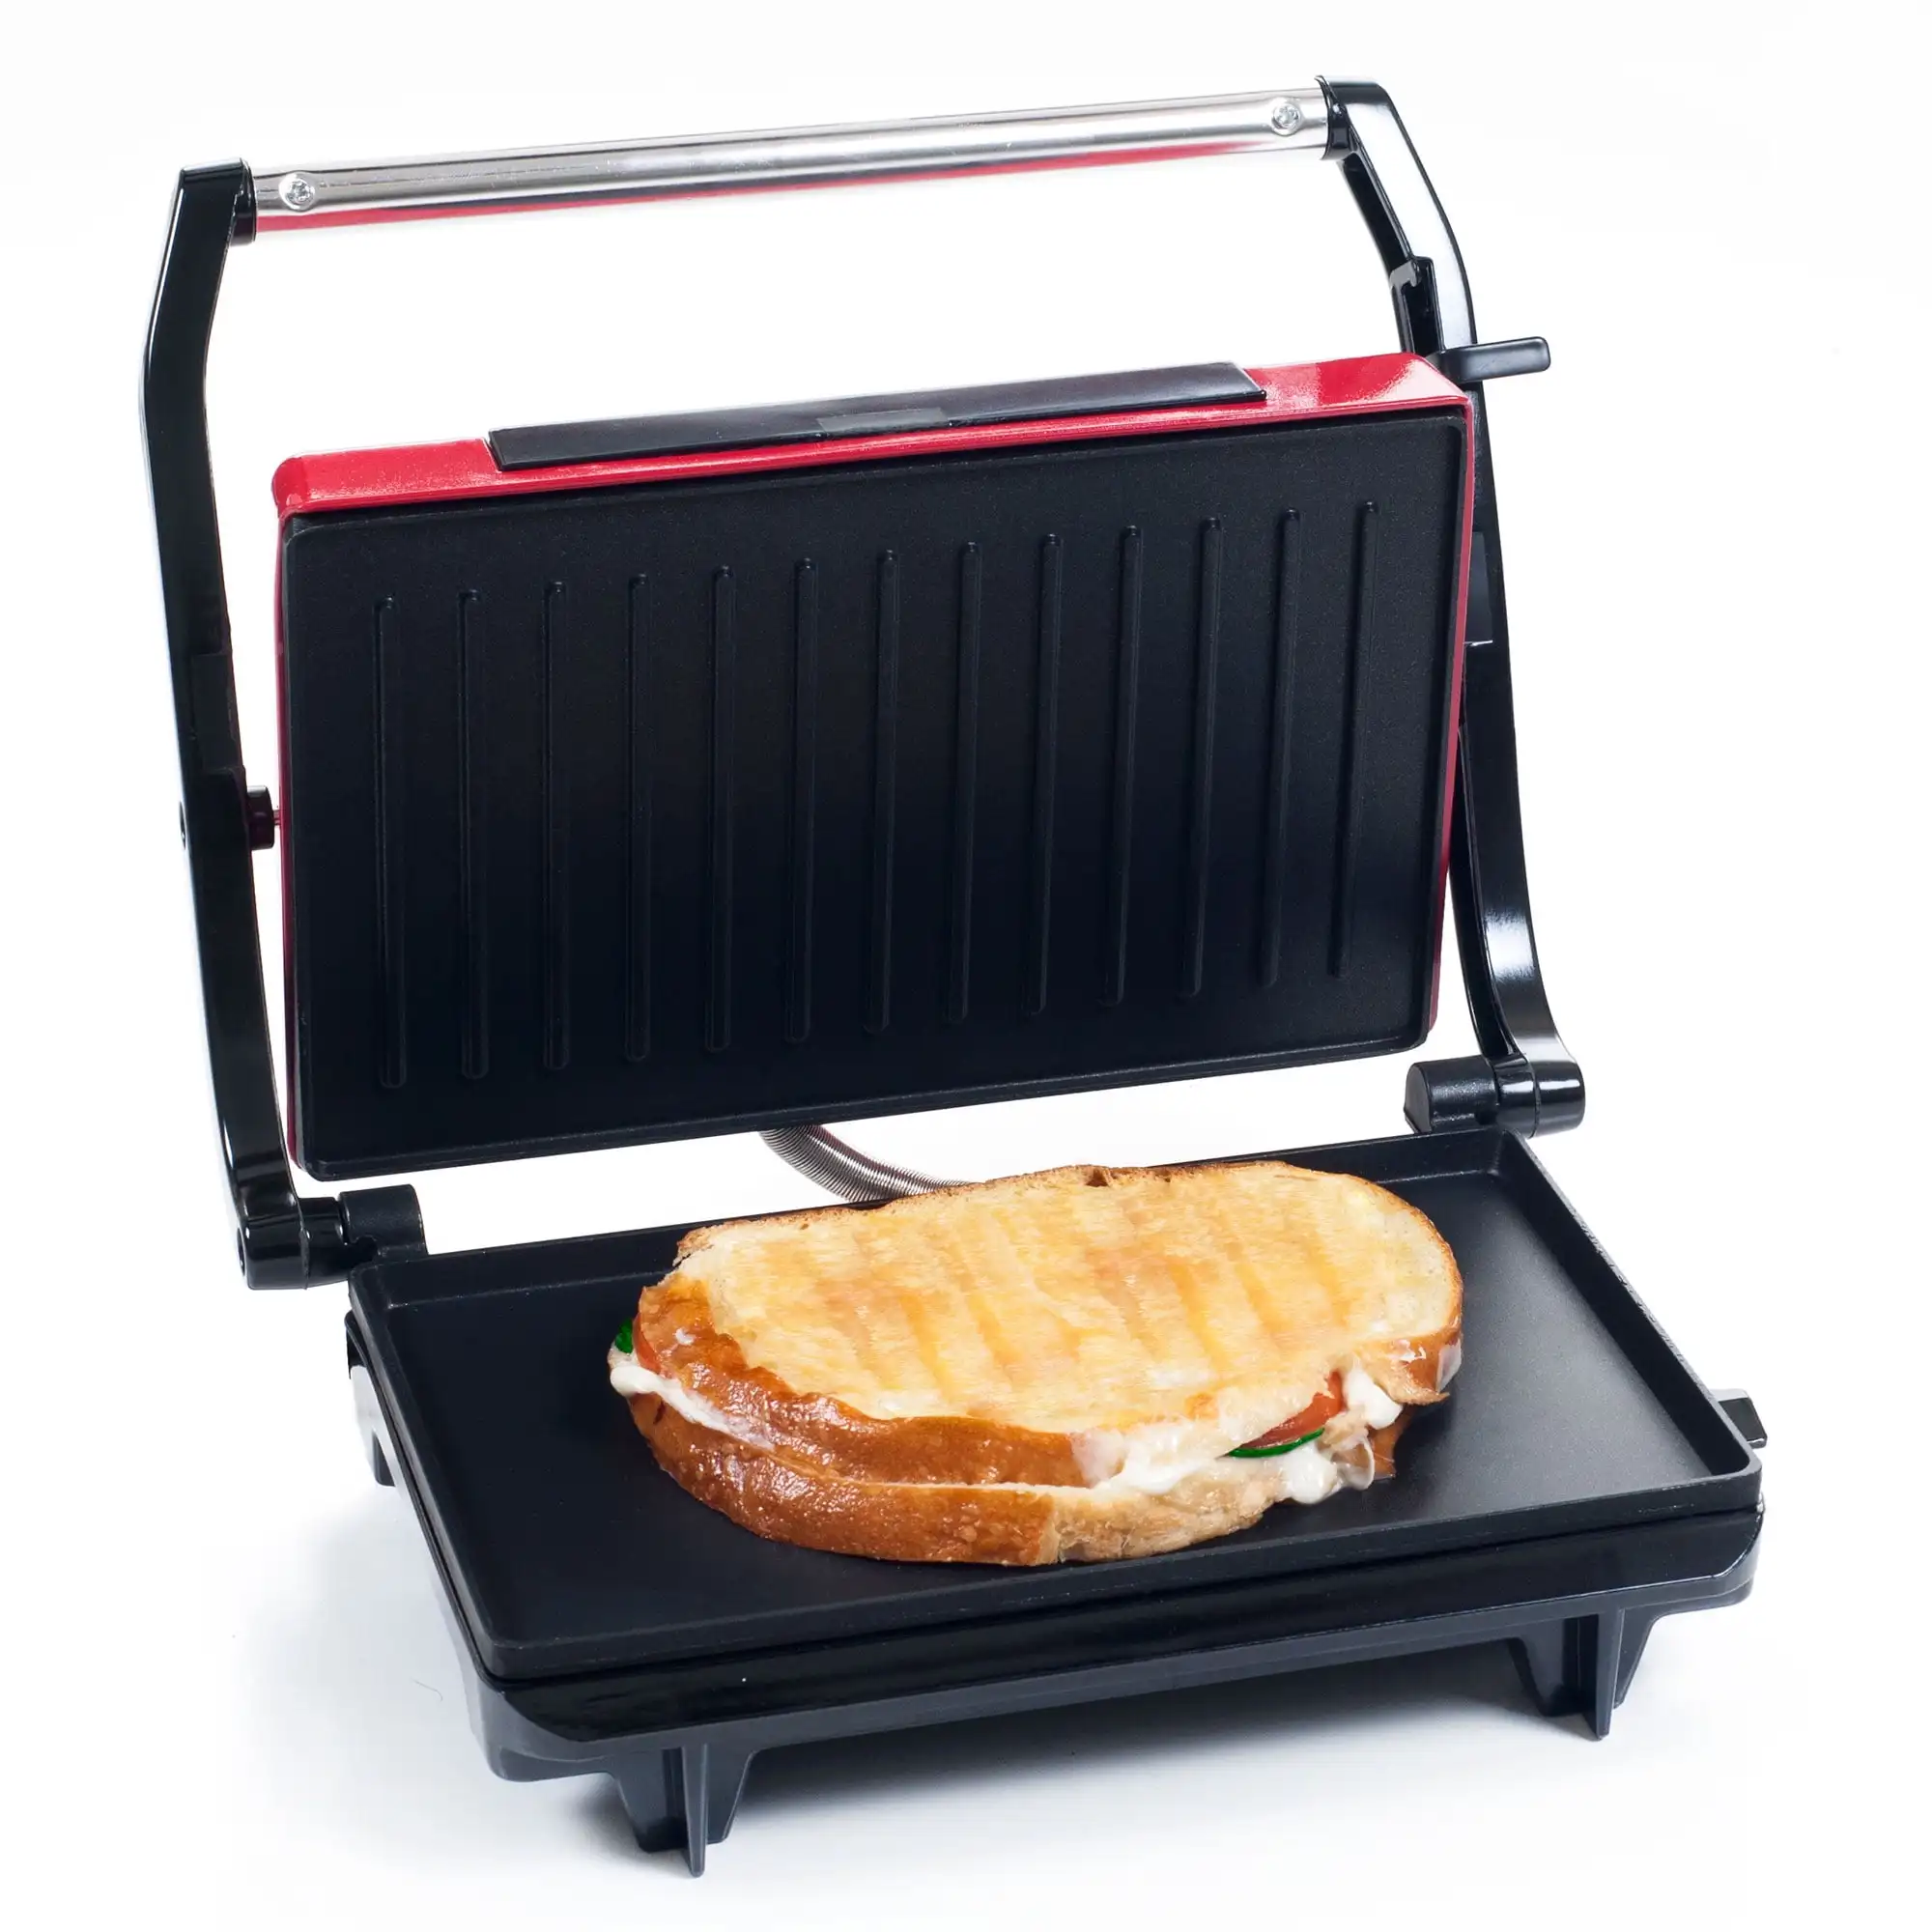 Chef Buddy Indoor Countertop Panini Press with Nonstick Plates (Red)